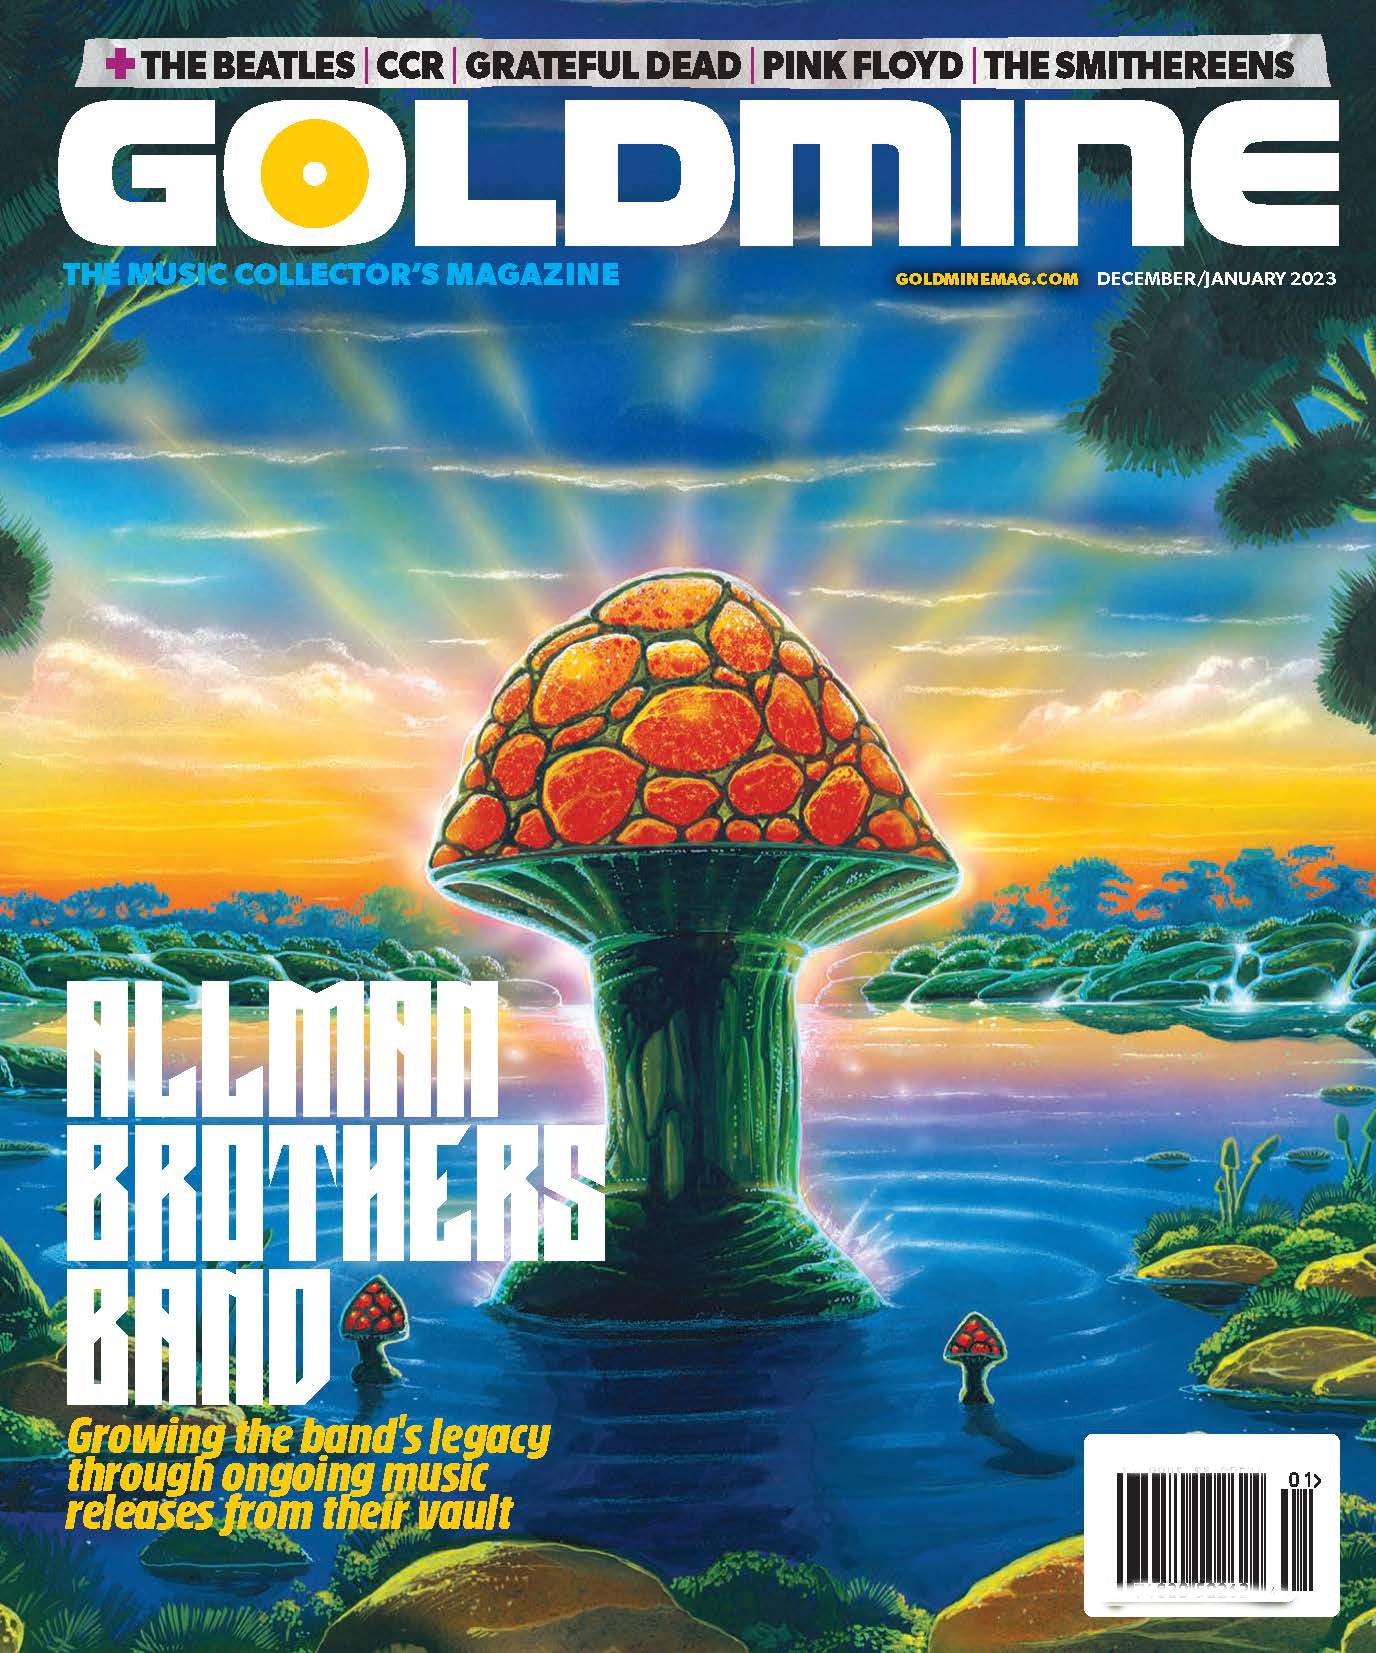 GOLDMINE MAGAZINE: THE ALLMAN BROTHERS BAND COVER EDITION - DEC/JAN 2023